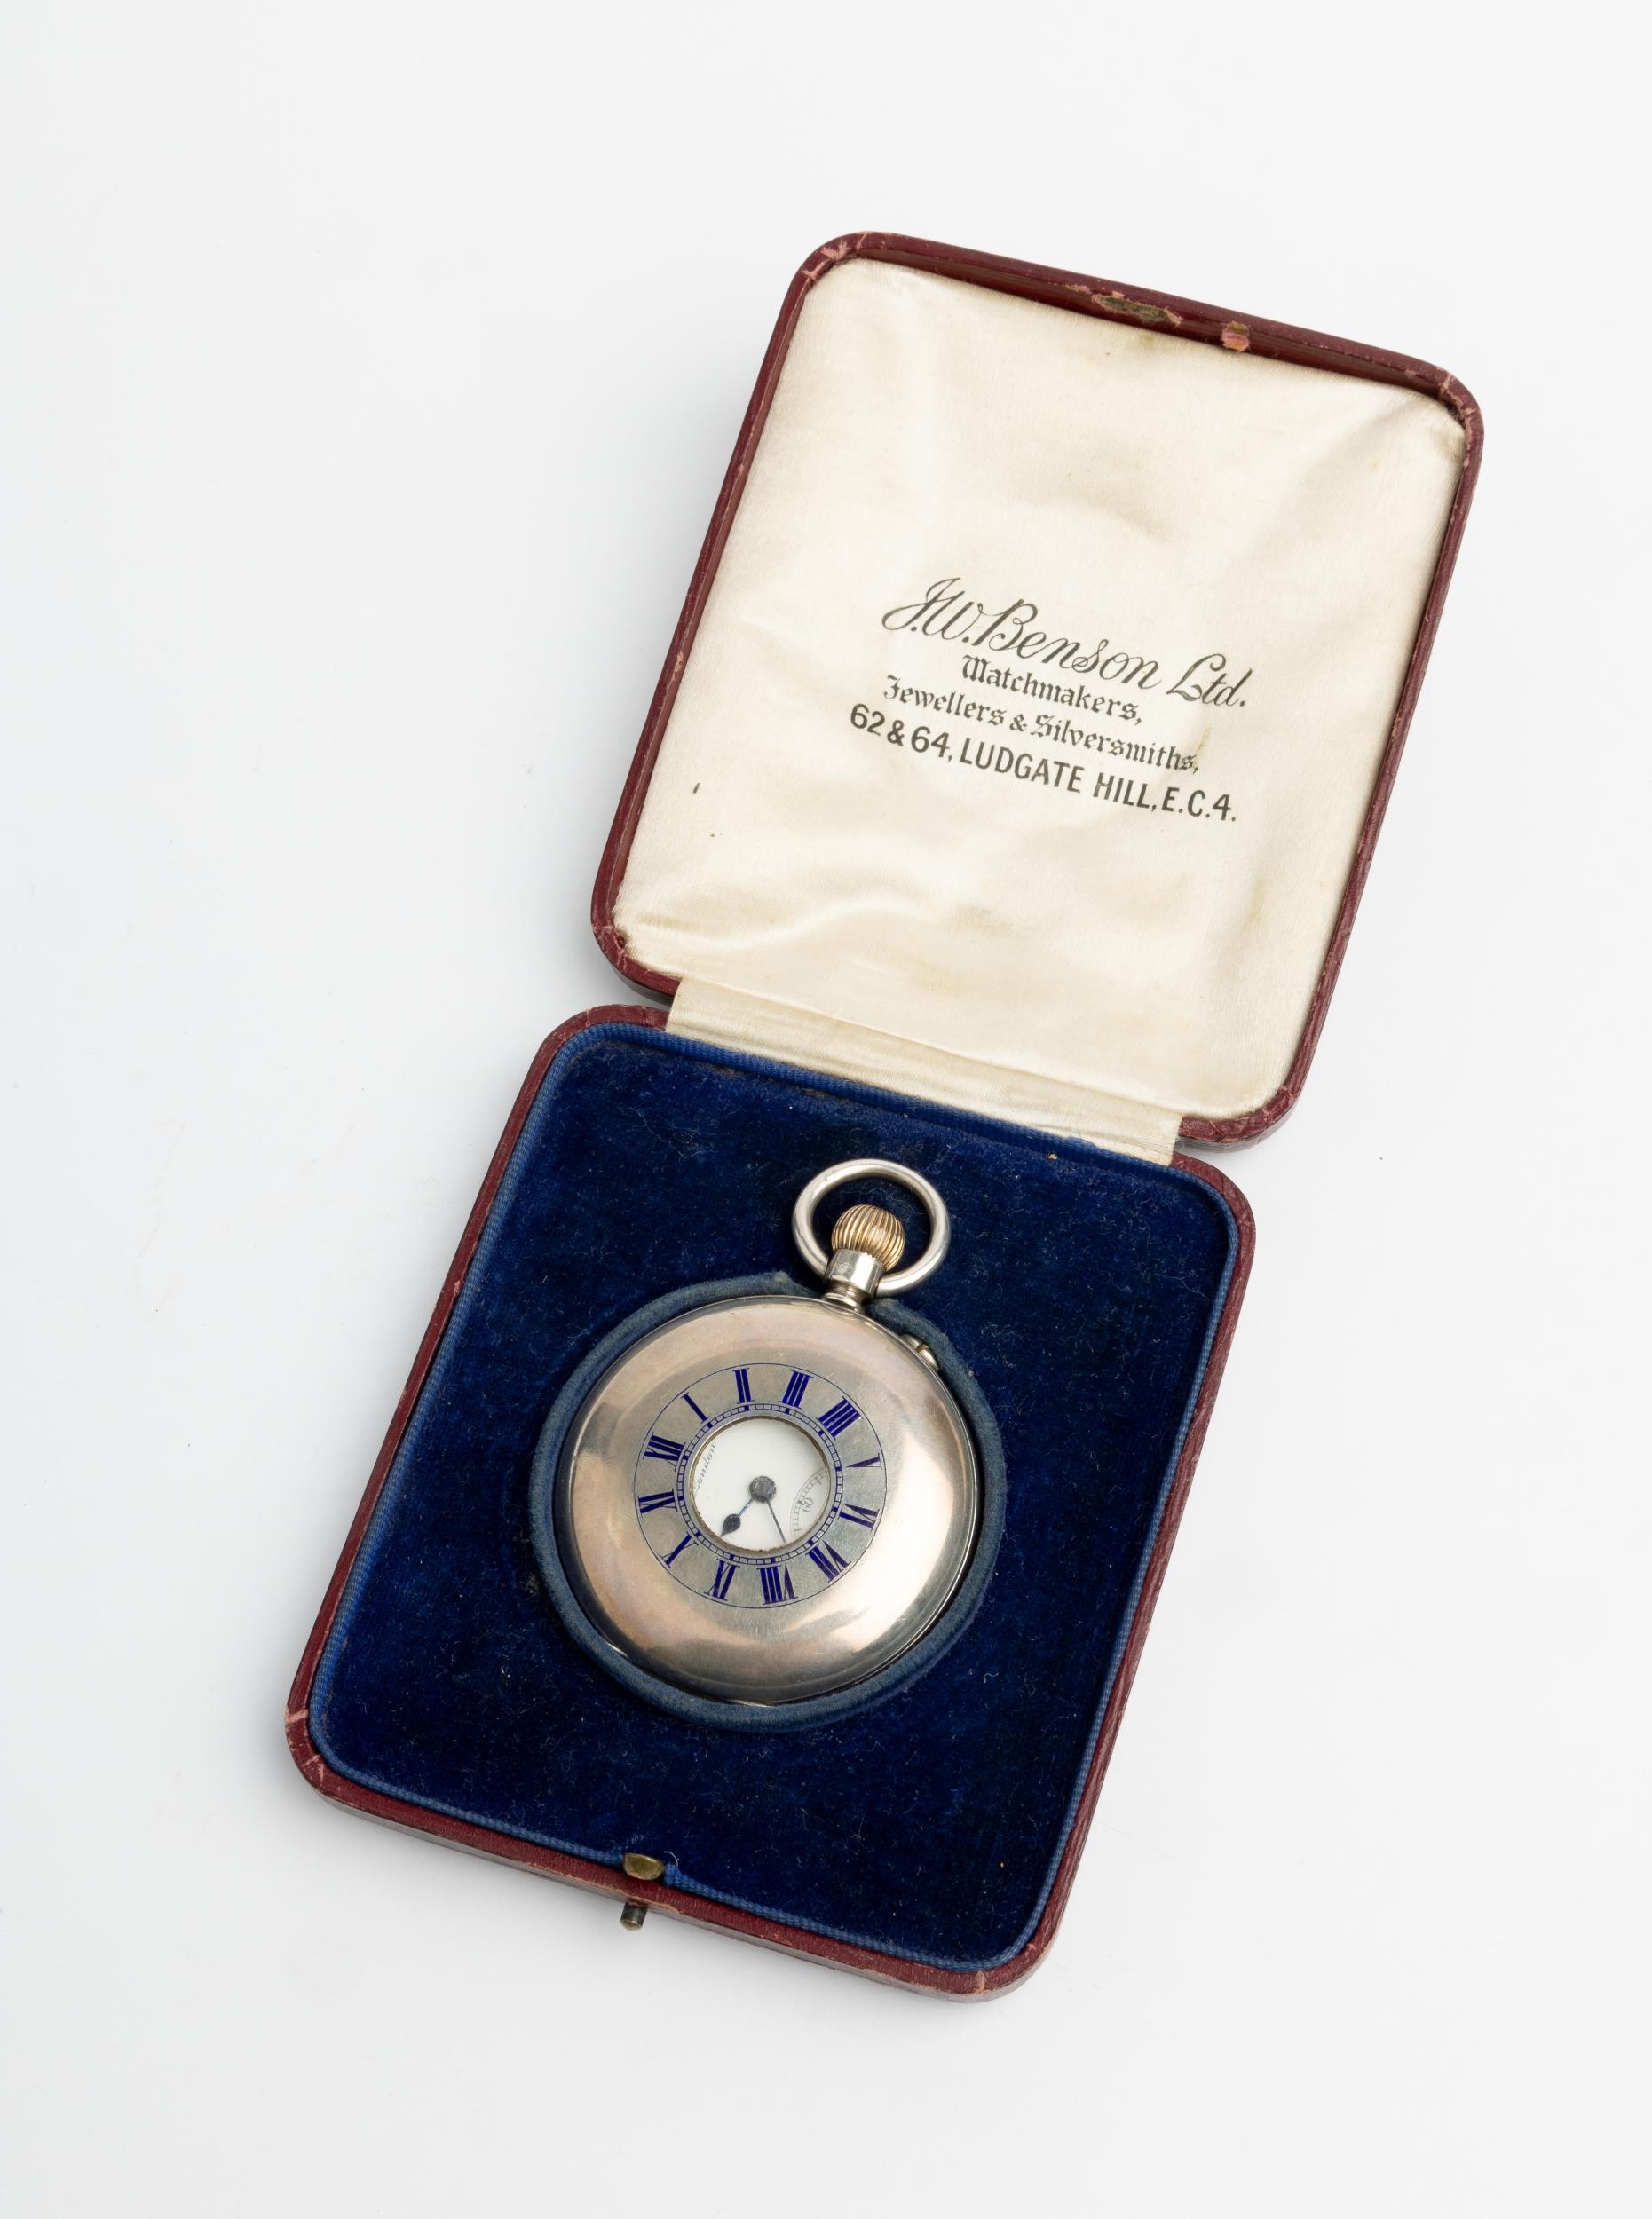 A SILVER HALF HUNTING CASED KEYLESS LEVEL WATCH. Signed J.W.Benson, Ludgate Hill, London, No.11961, - Image 2 of 4